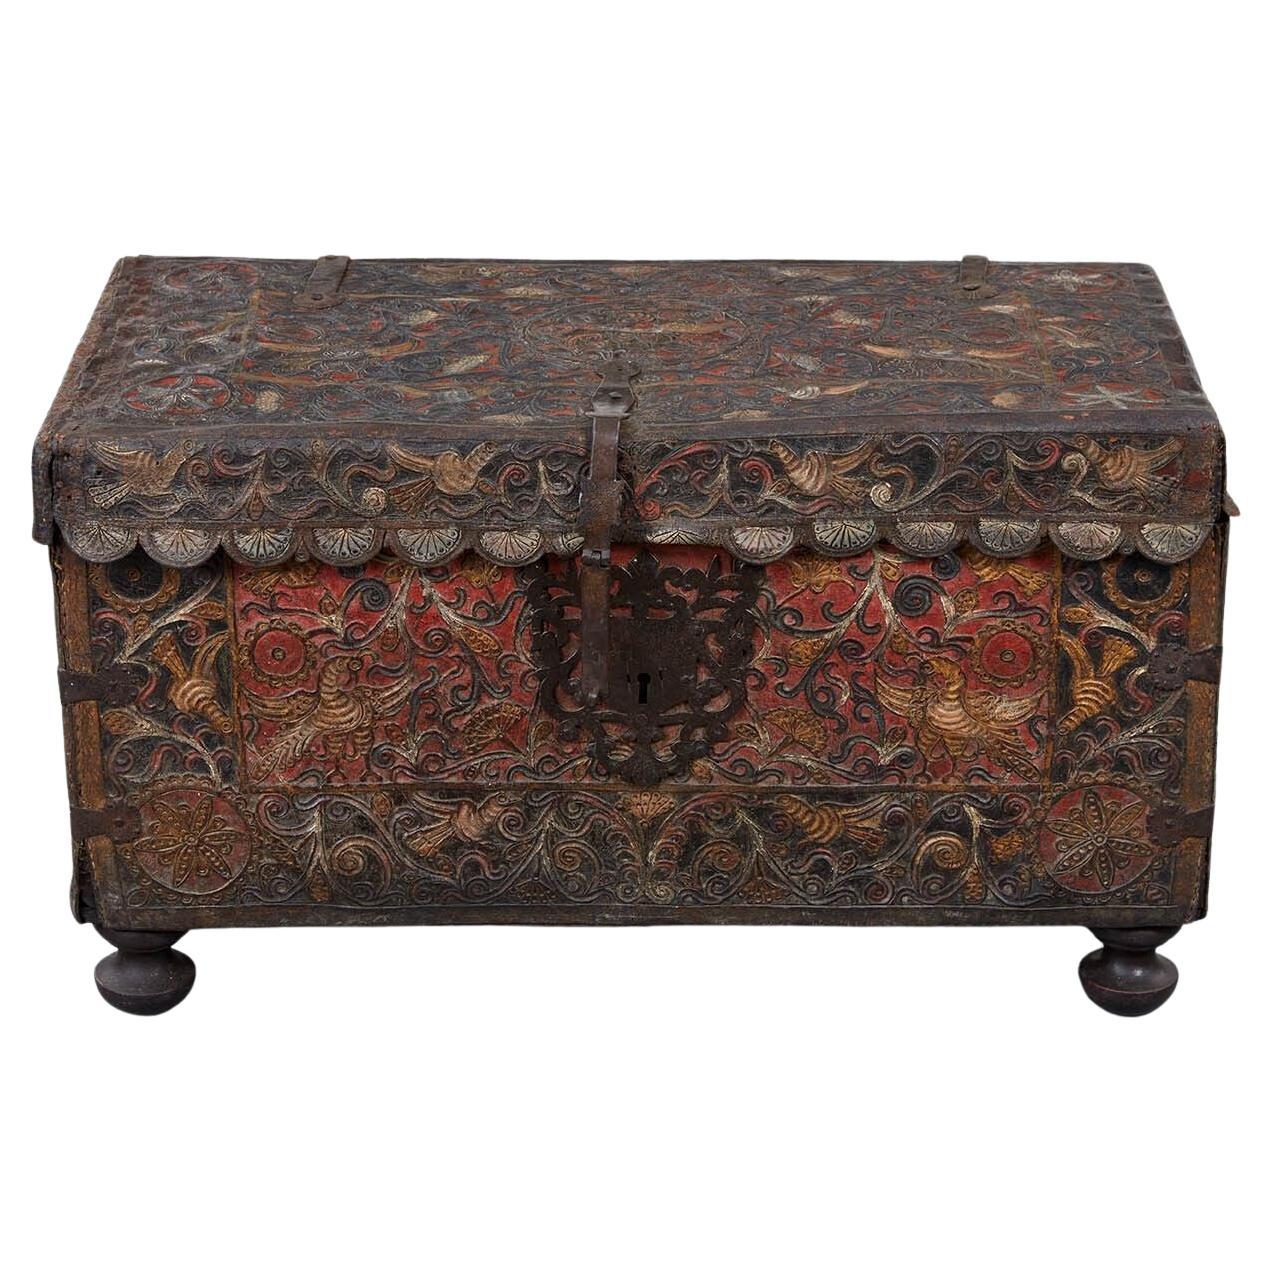 Polychromed Spanish Colonial Leather Trunk